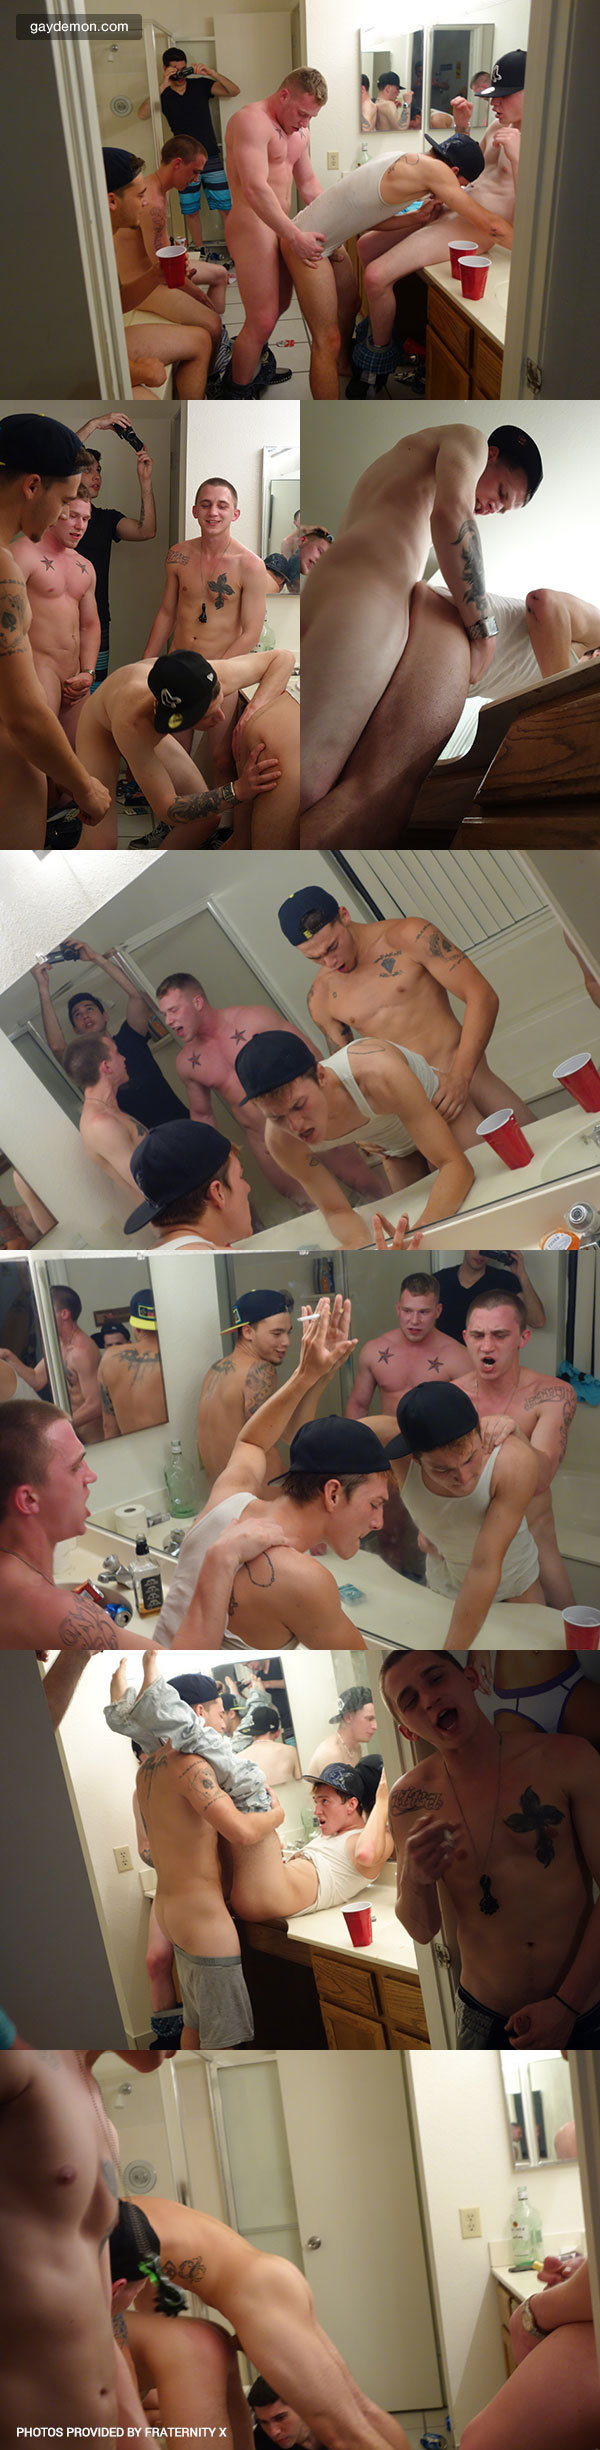 Yet Another Fraternity Bareback Orgy